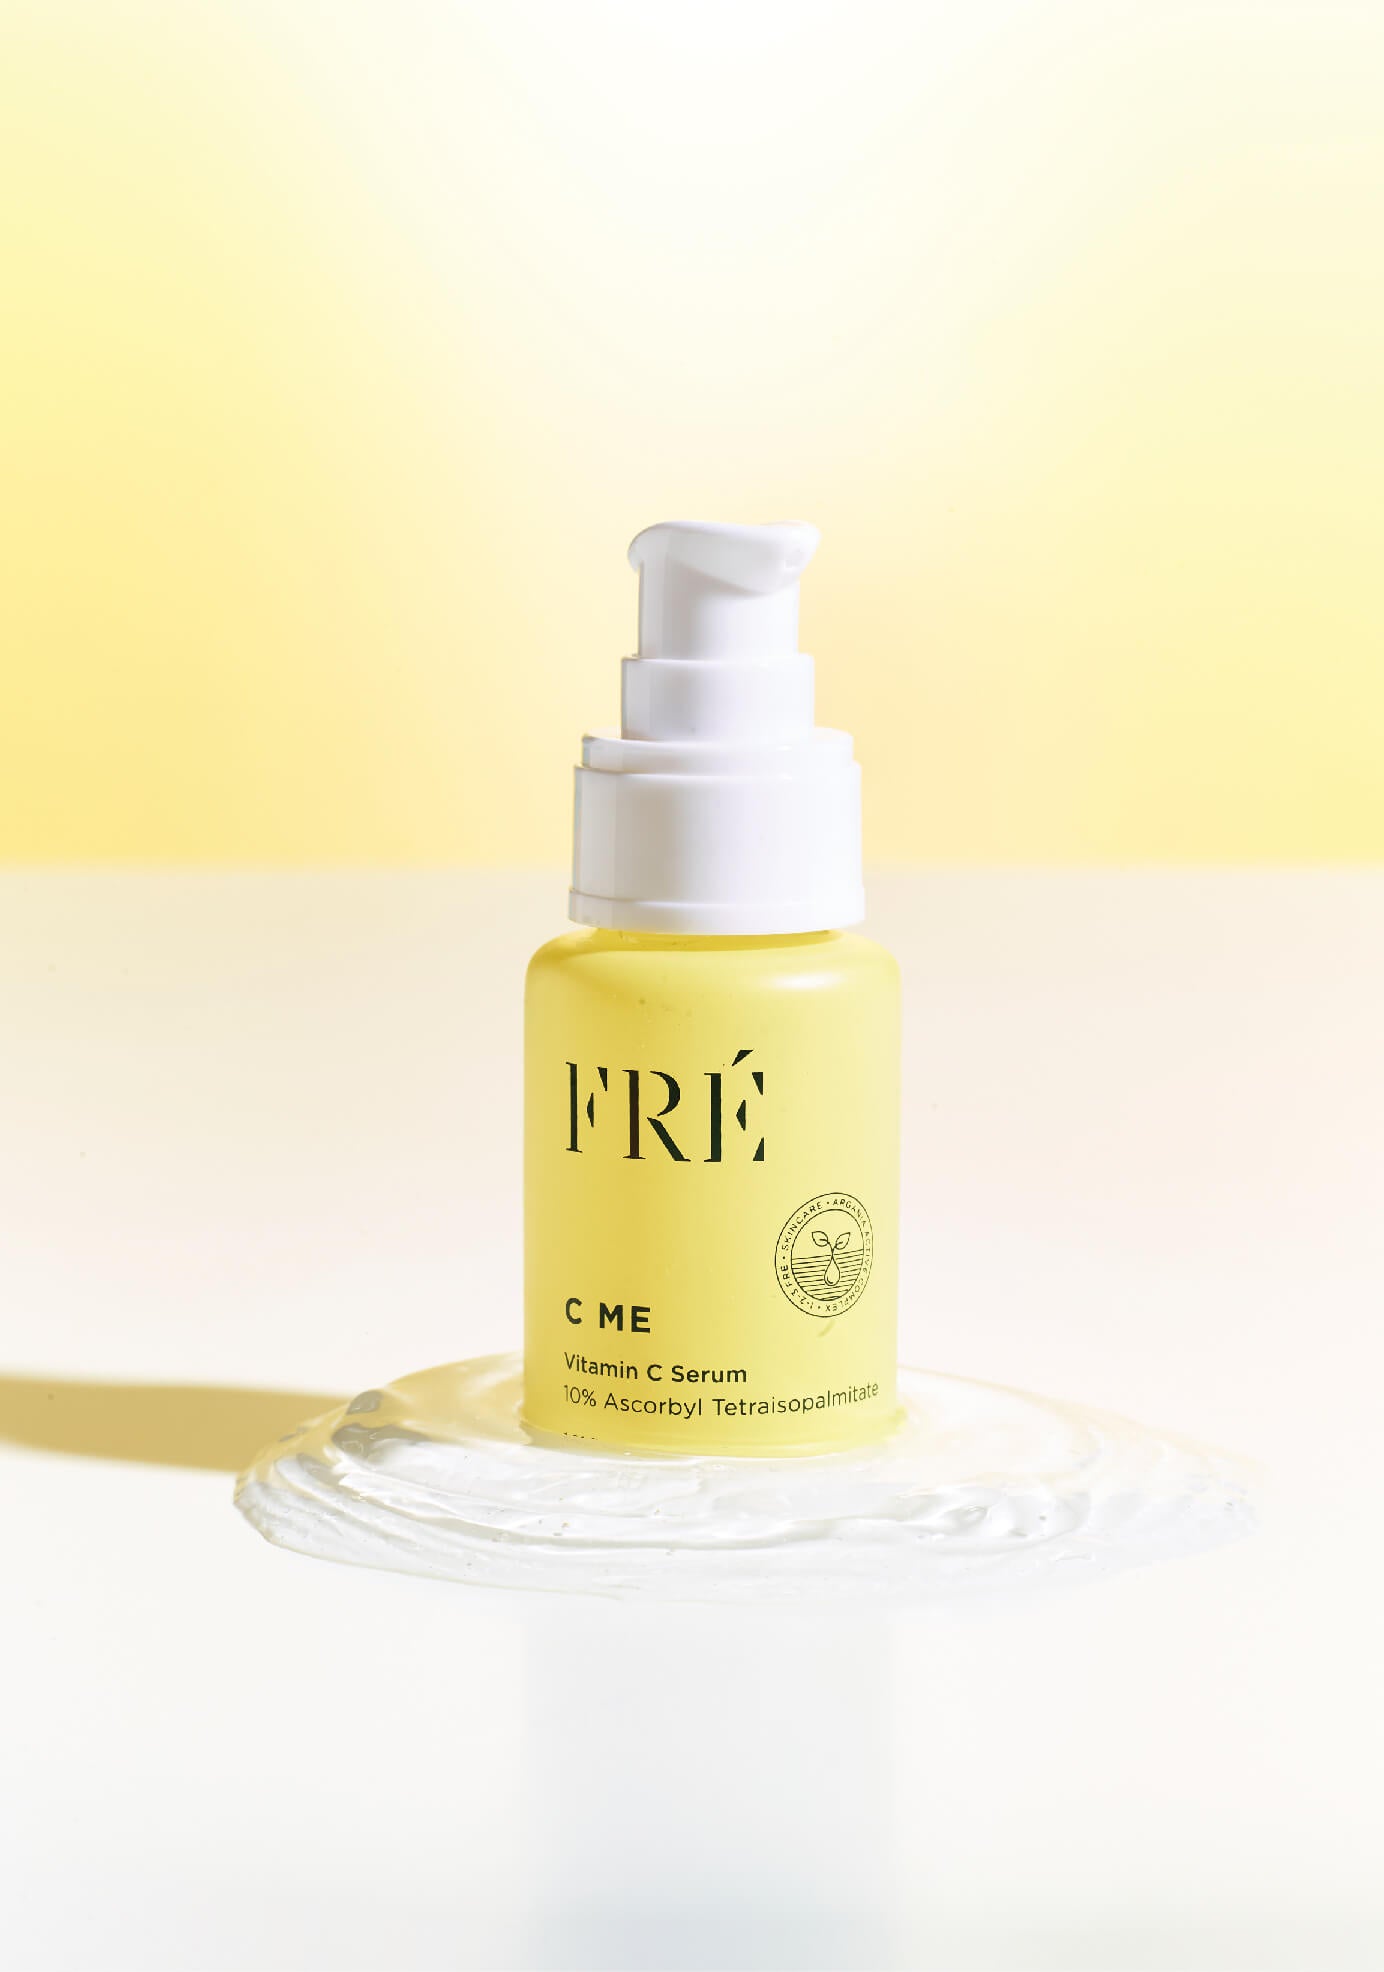 C ME - Vitamin C Serum by FRÉ - on a gel like surface with yellow background